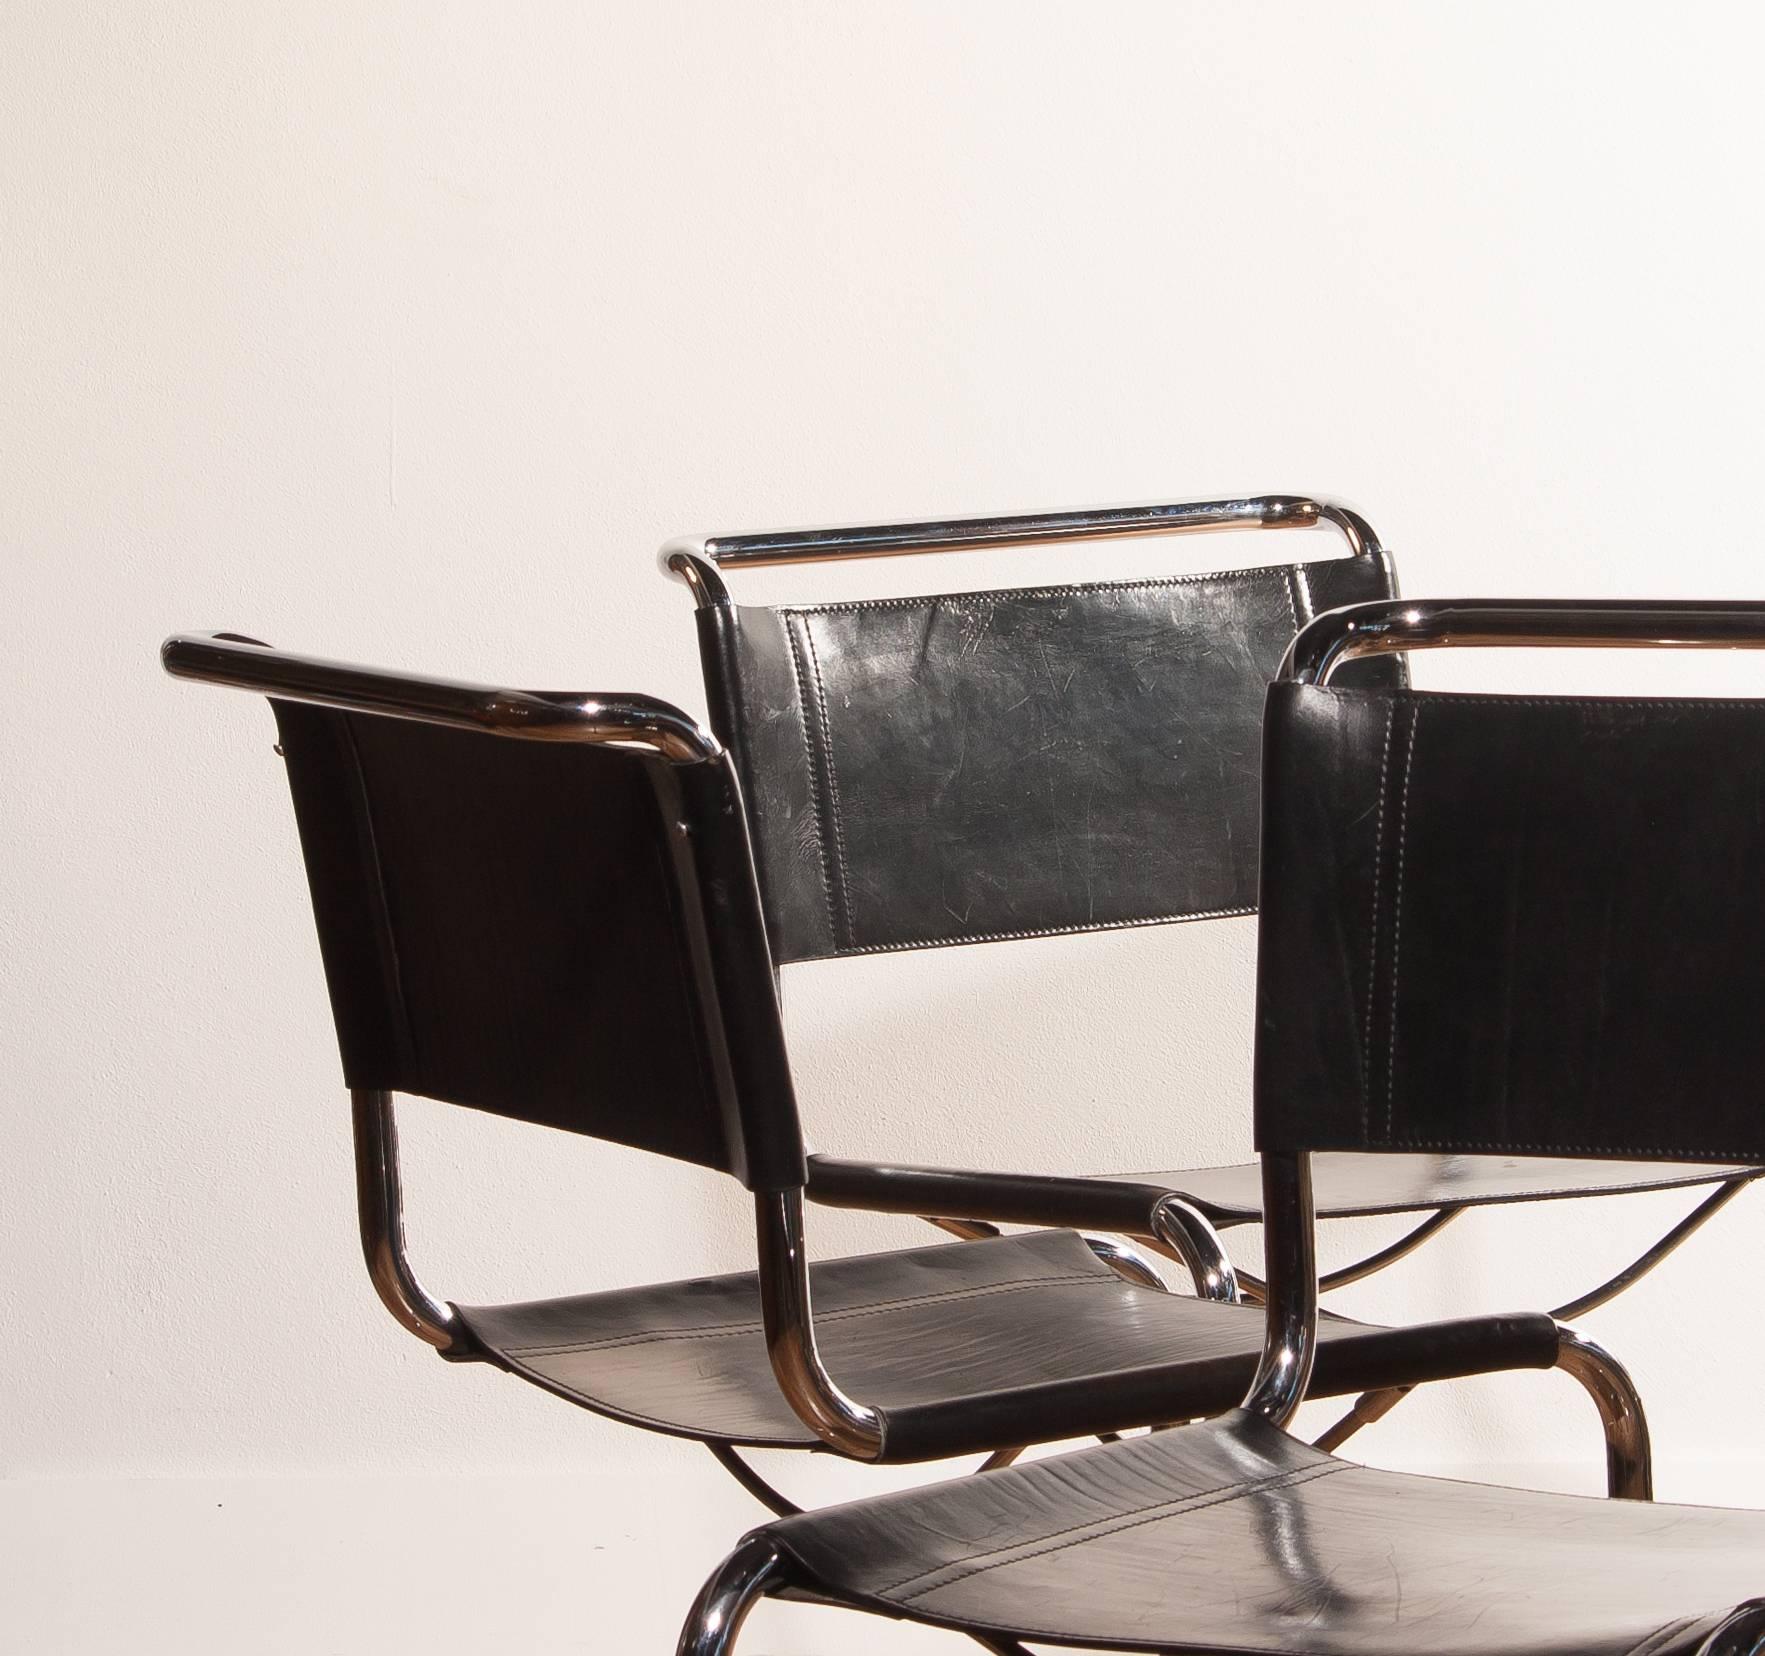 A beautiful set of six dining chairs designed by Mart Stam for Fasem.
These chairs have a cantilevered tubular metal frame with black saddle leather seating and backrest.
They are in a wonderful condition.
Period 1970s
Dimensions : H 84 cm , W